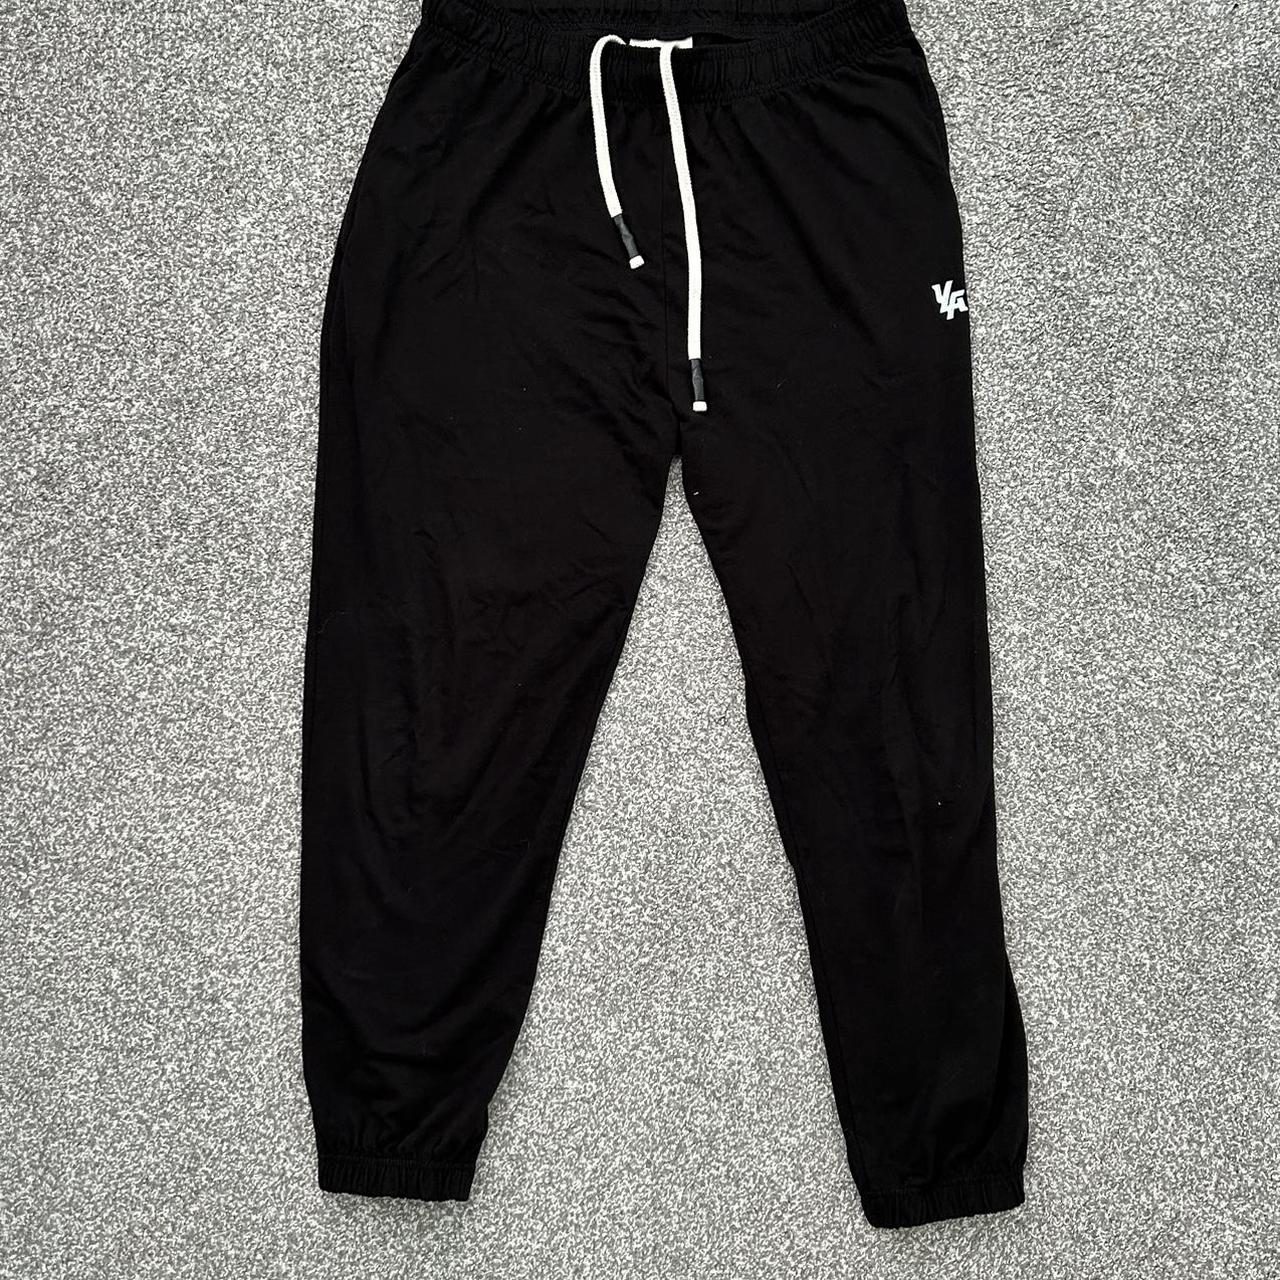 YoungLA Black 231 pump cover joggers , Size X large (